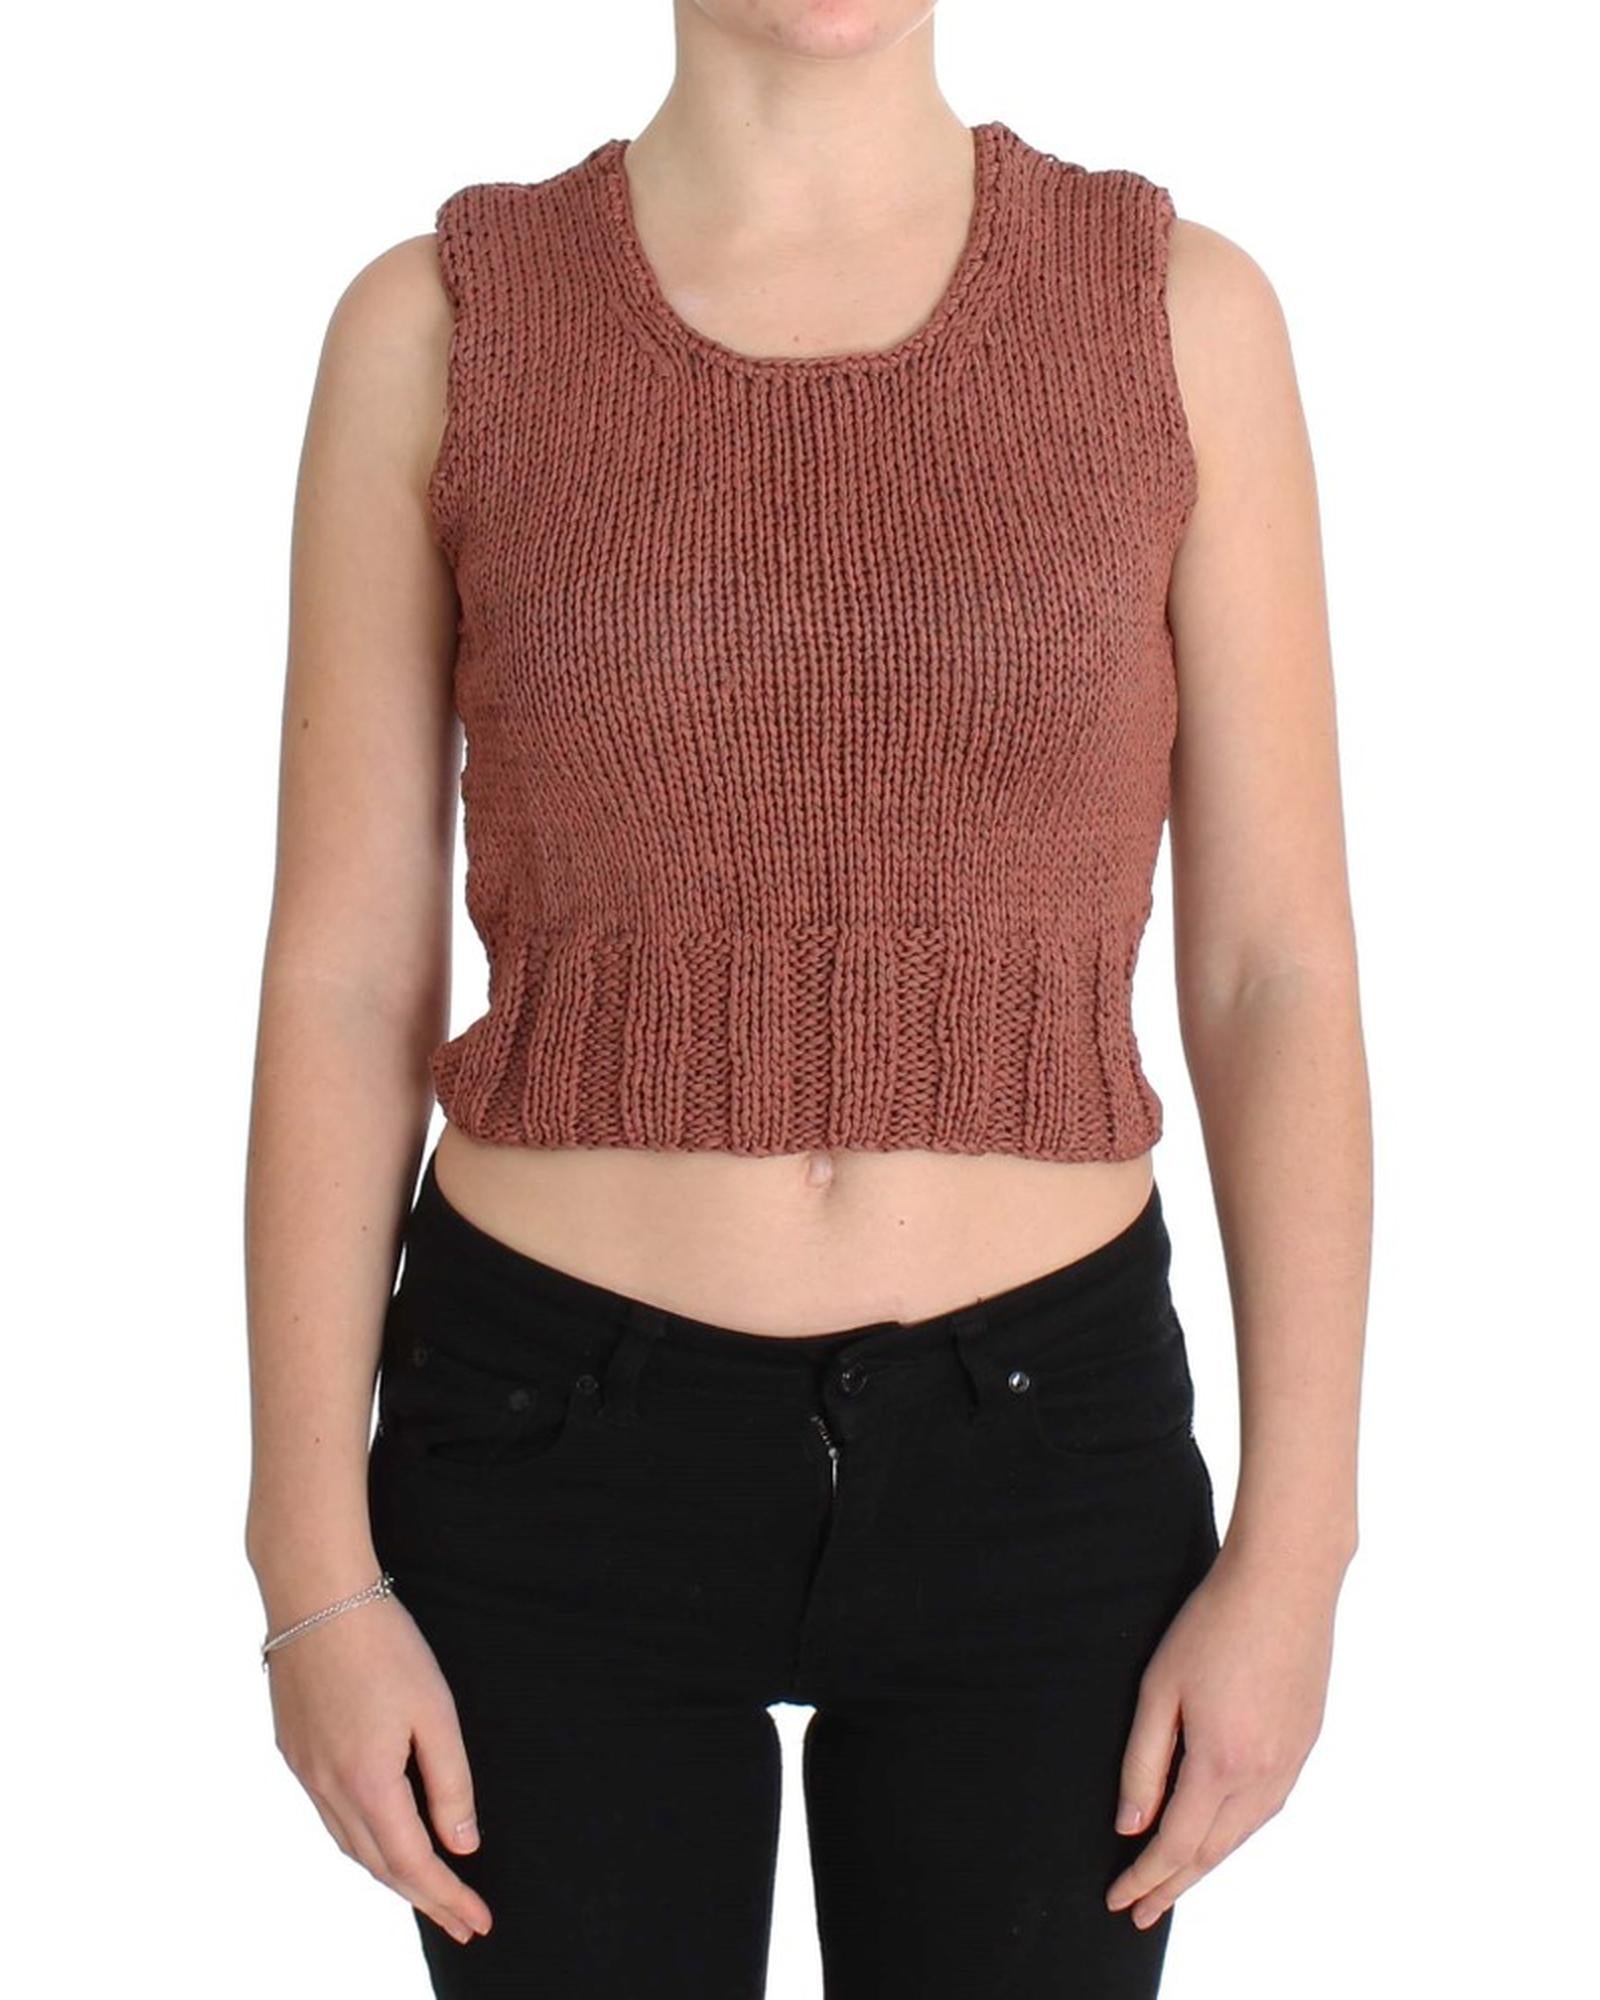 Red Knitted Cotton Blend Vest Sweater One Size Women